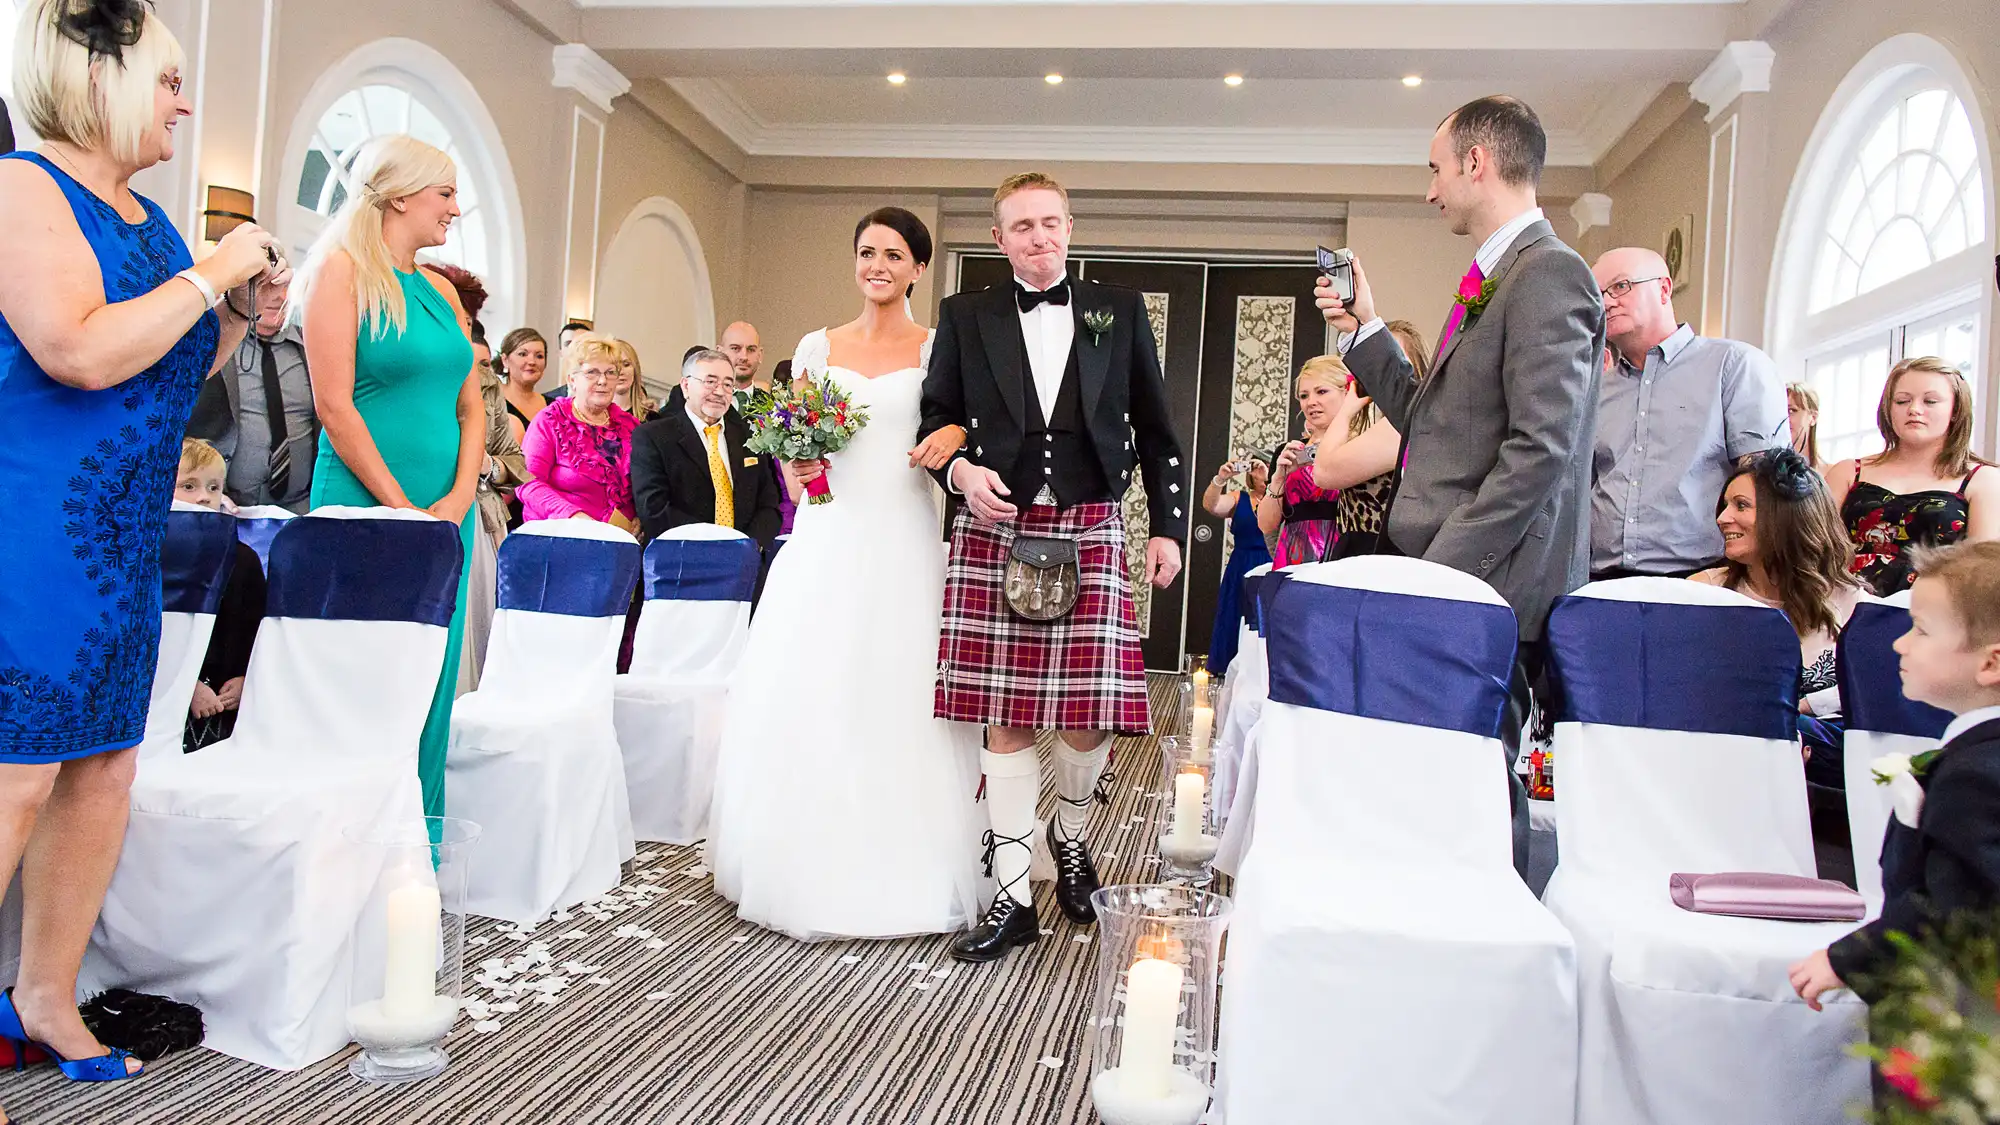 A bride and groom walking down the aisle, the groom wearing a kilt, with guests watching and taking photos in a decorated wedding venue.